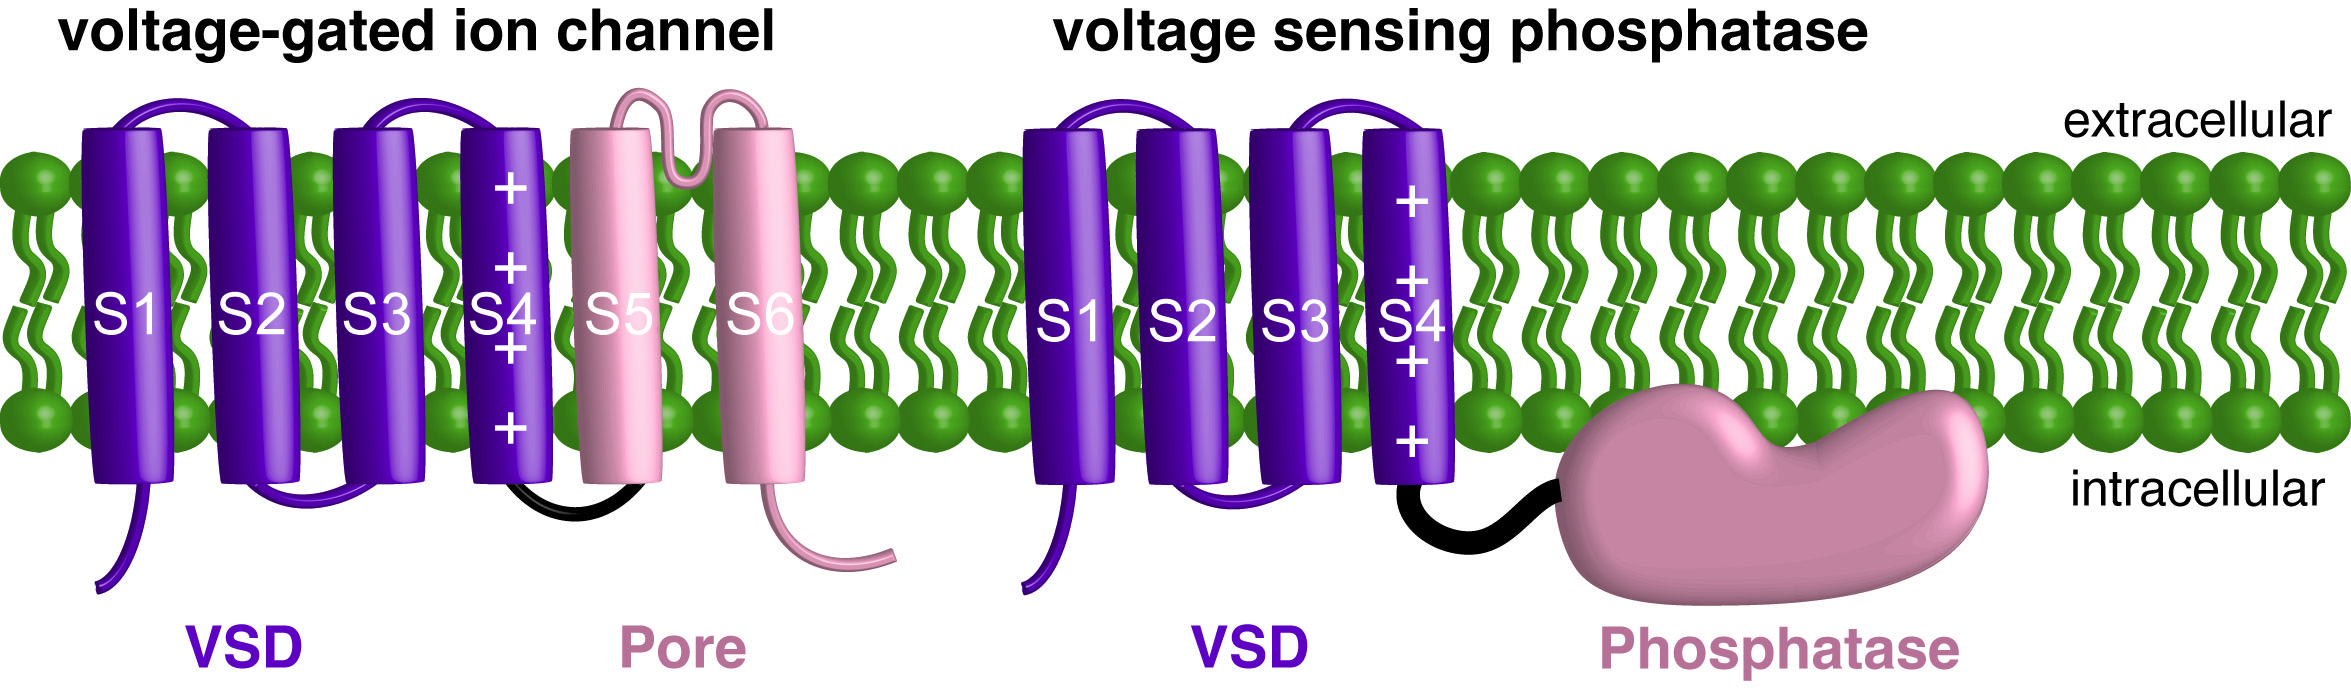 cartoon of voltage gated ion channel and the voltage sensing phosphatase with the voltage sensing domain helices labeled, S1-S4